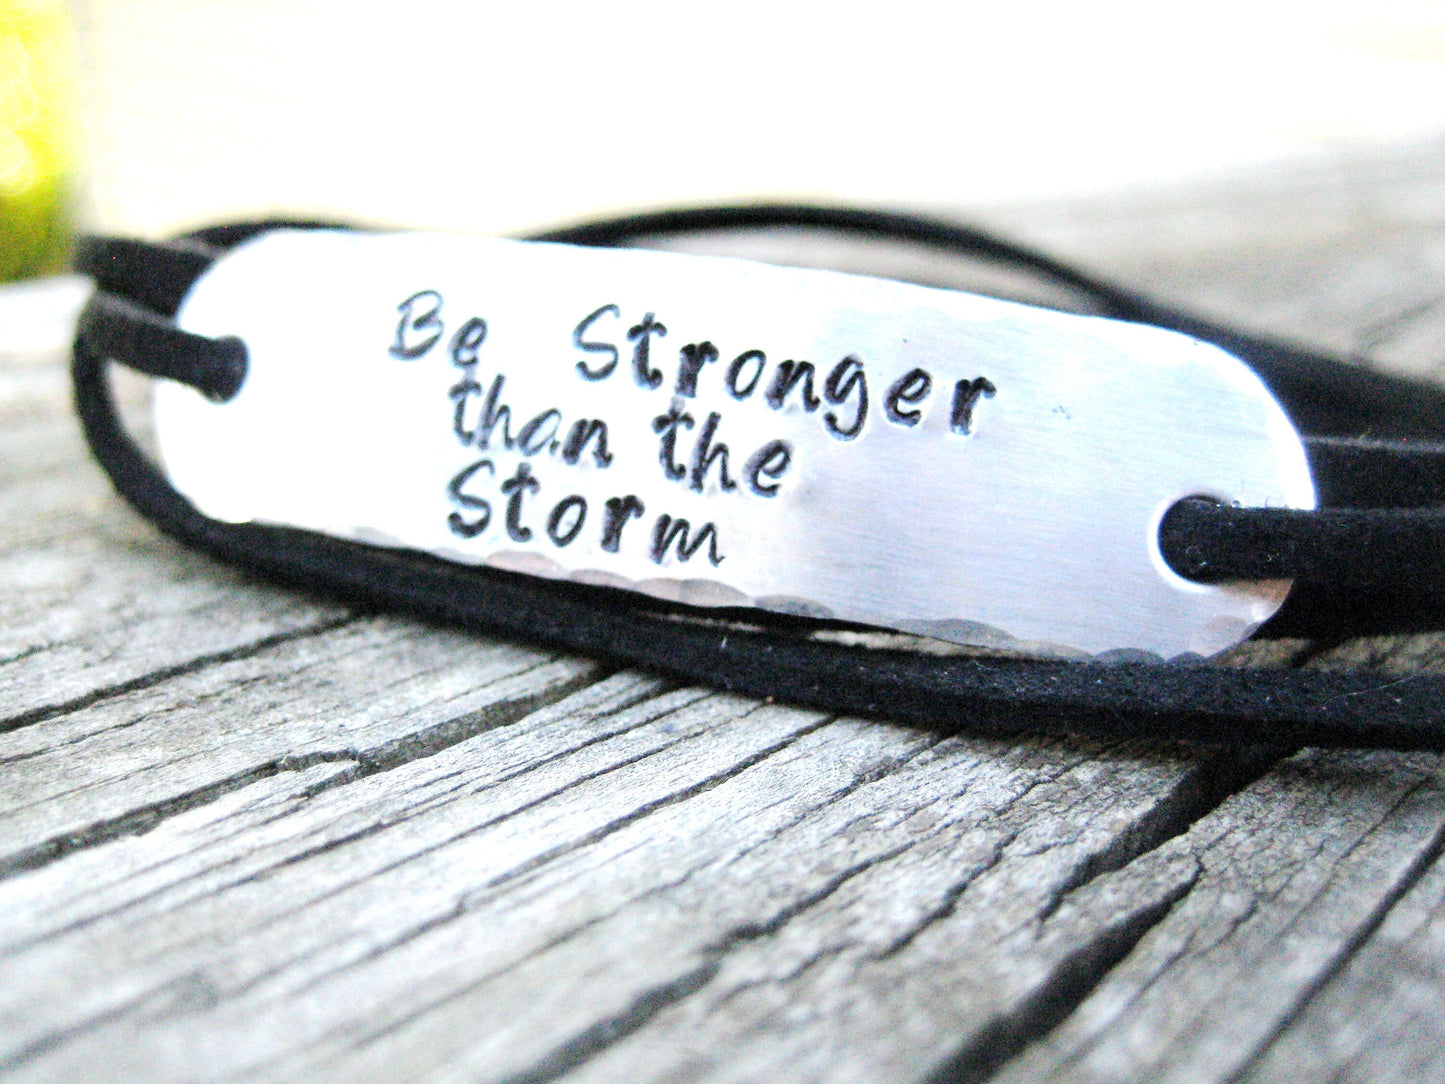 PERSONALIZED BRACELET WRAP - Be Stronger Than the Storm, Hand Stamped, Bracelet Wrap, Encouragement gift,  with suede cord